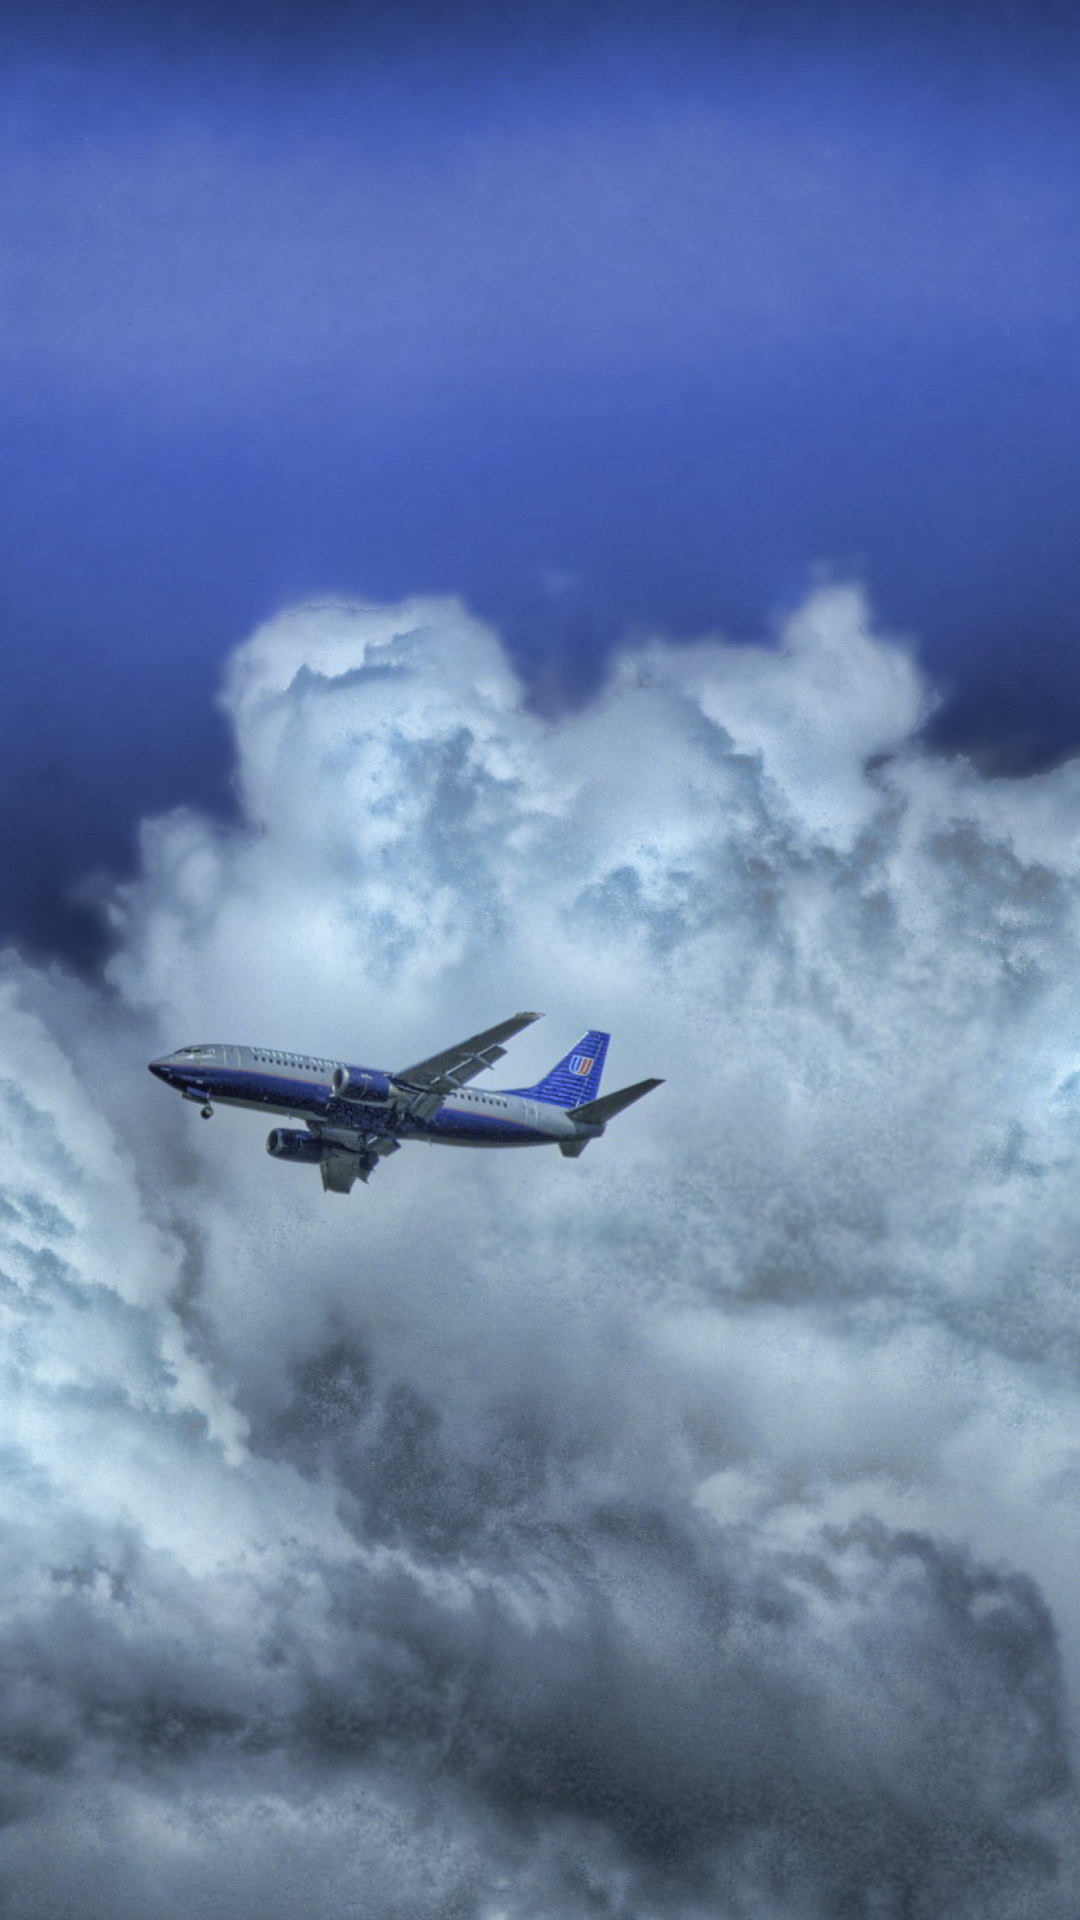 Airplane In Clouds wallpaper 1080x1920